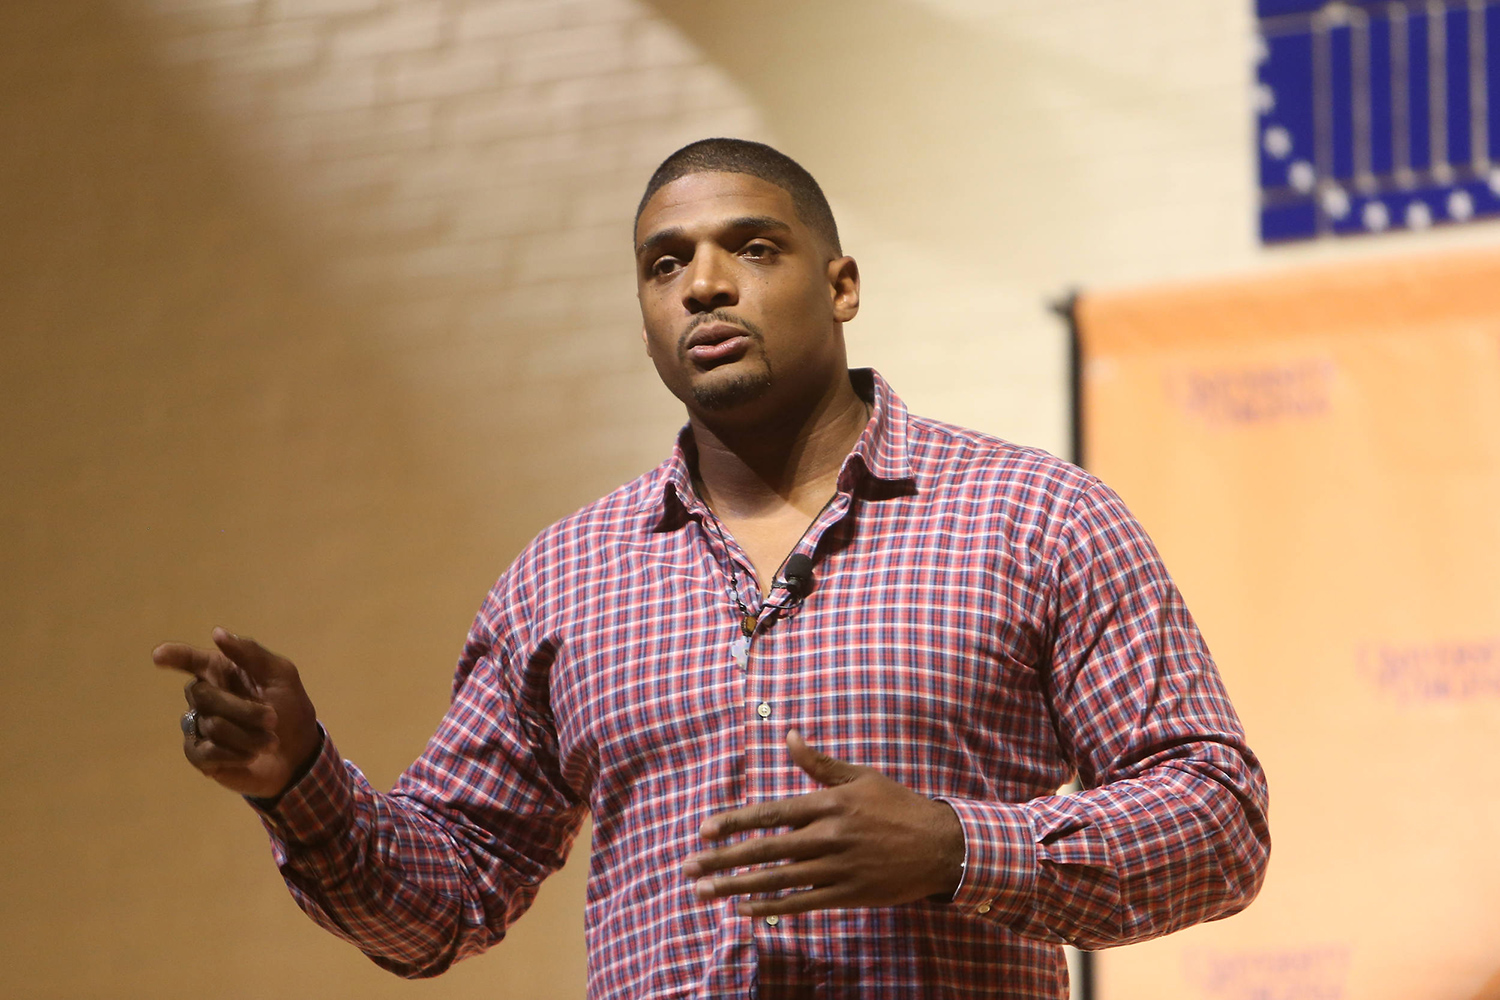 Michael Sam speaking on stage to a crowd